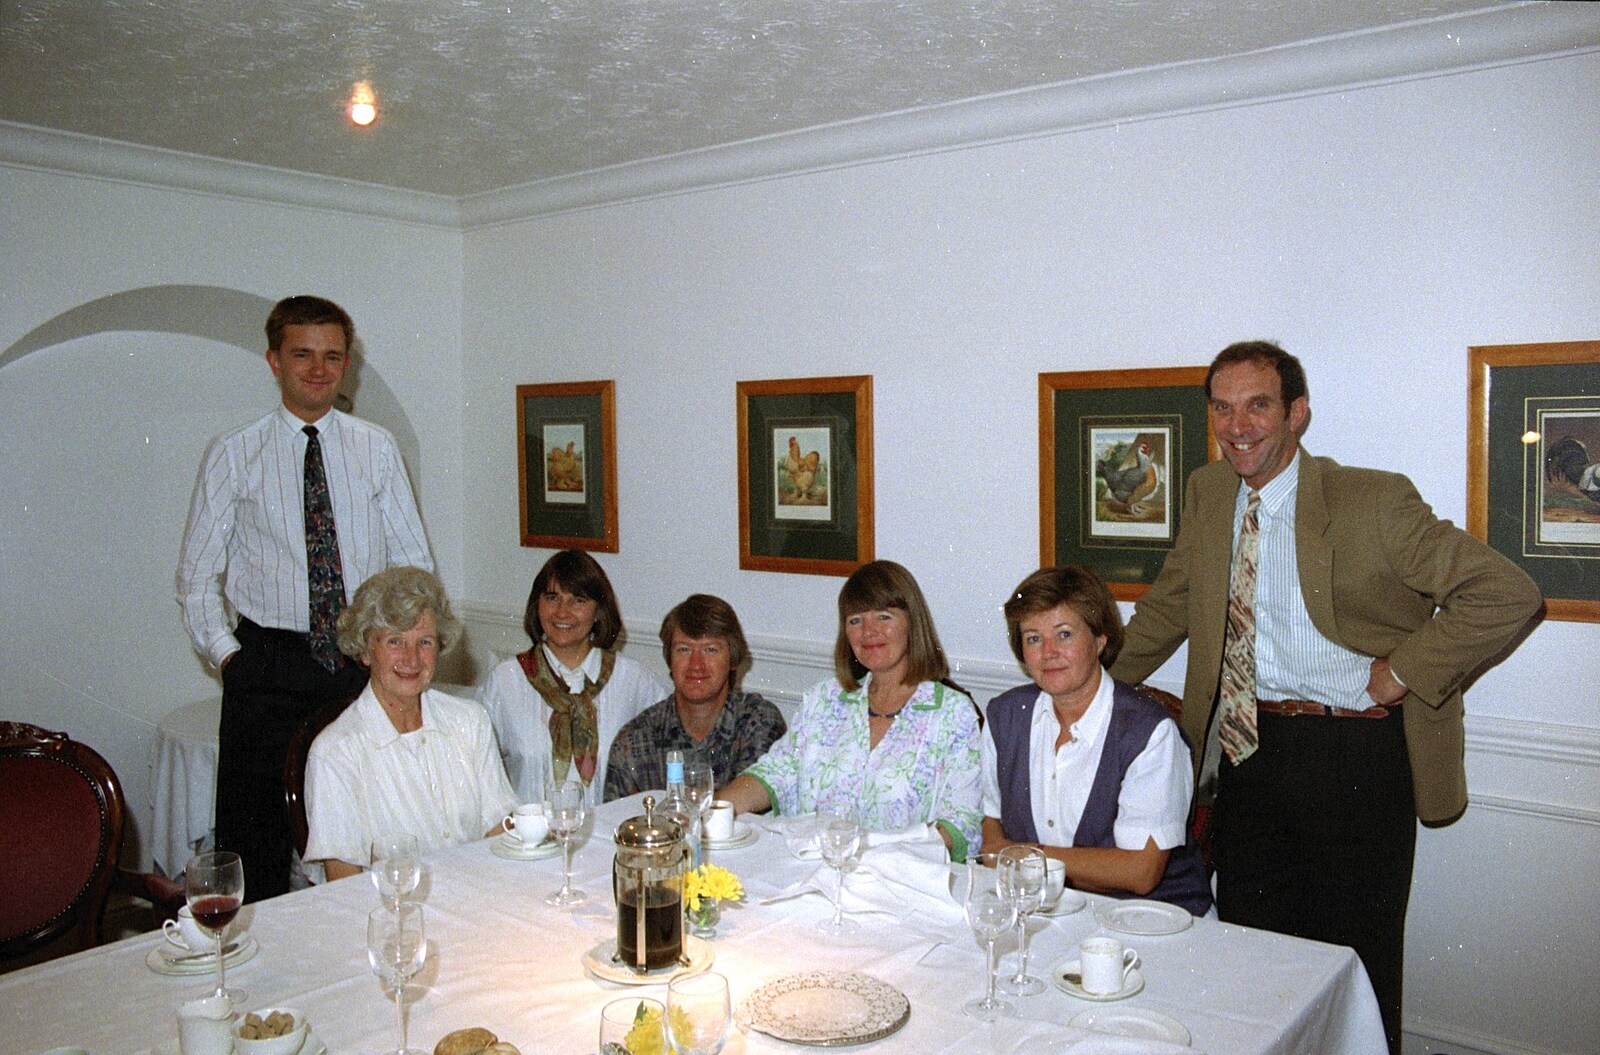 Grandmother's Seventieth Birthday, Brockenhurst and Keyhaven, Hampshire - 11th September 1994: Nosher joins in for a group photo